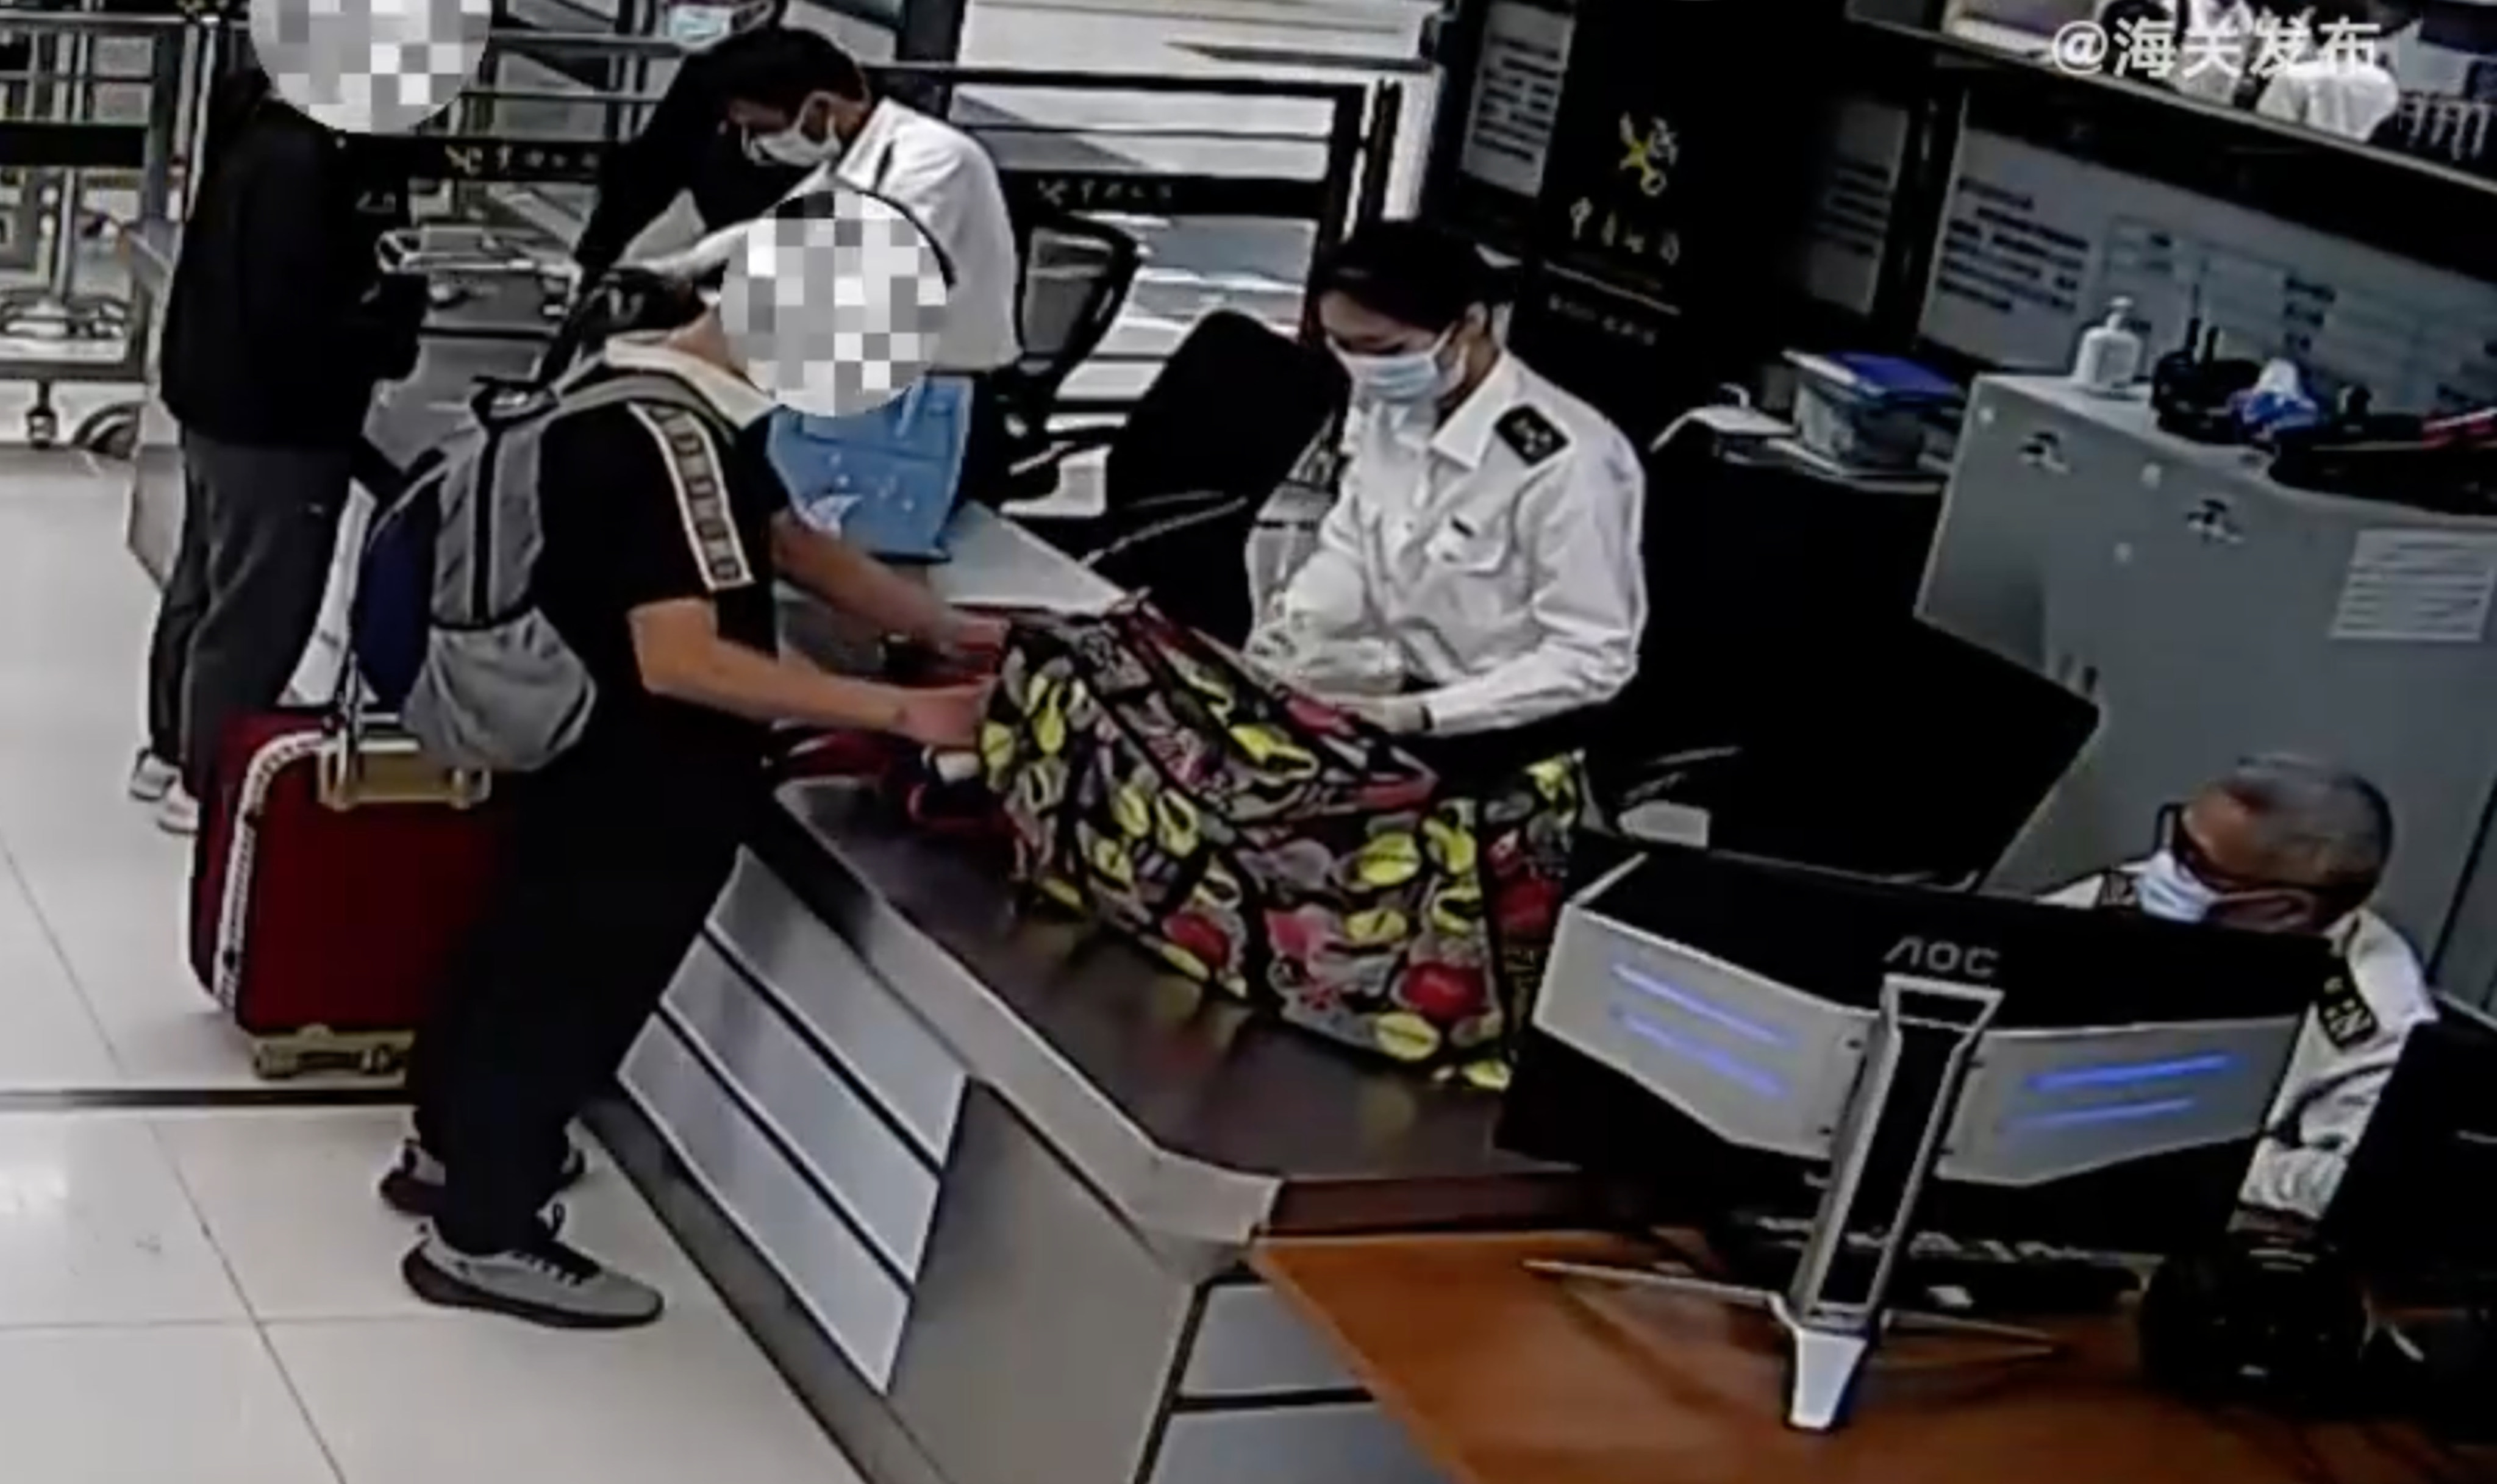 Two men were stopped by mainland customs officers after X-ray scans looked suspicious. Photo: SCMP